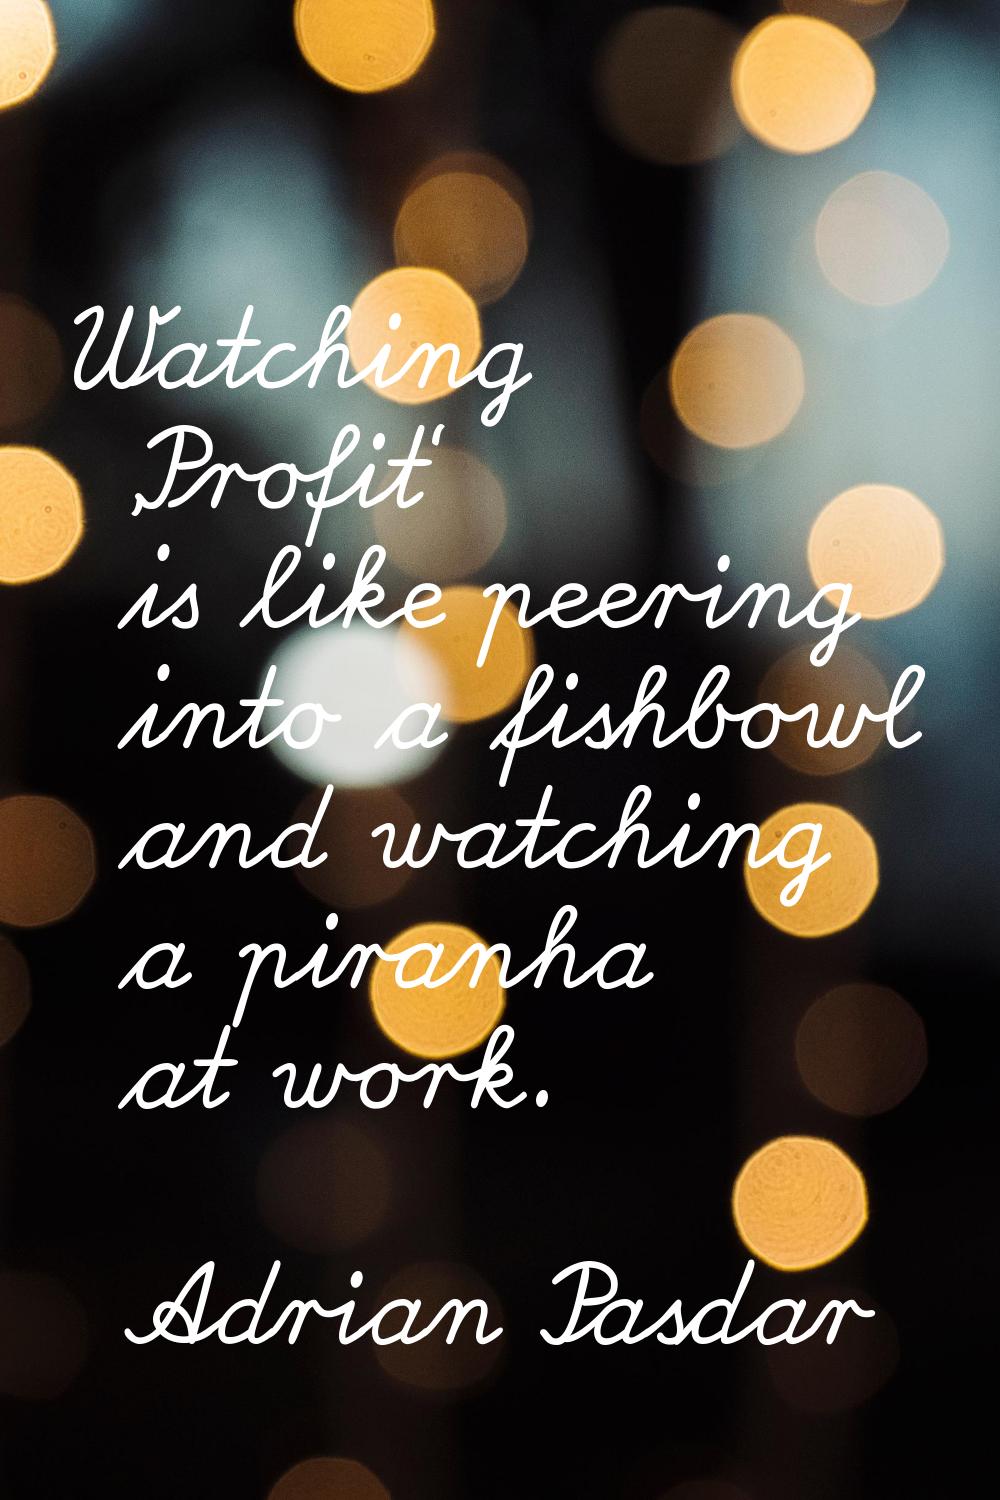 Watching 'Profit' is like peering into a fishbowl and watching a piranha at work.